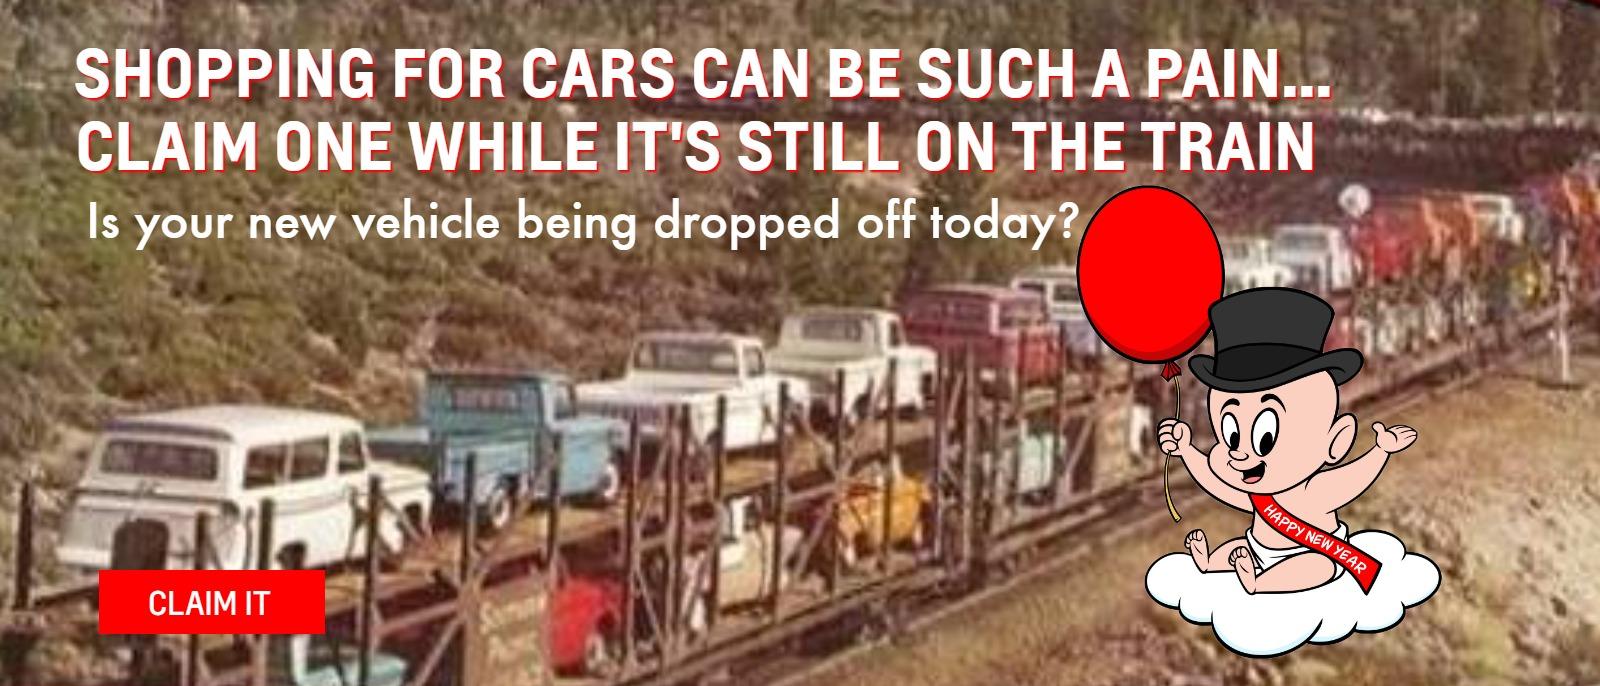 SHOPPING FOR CARS CAN BE SUCH A PAIN...
CLAIM ONE WHILE IT'S STILL ON THE TRAIN
Is you being dropped off today?